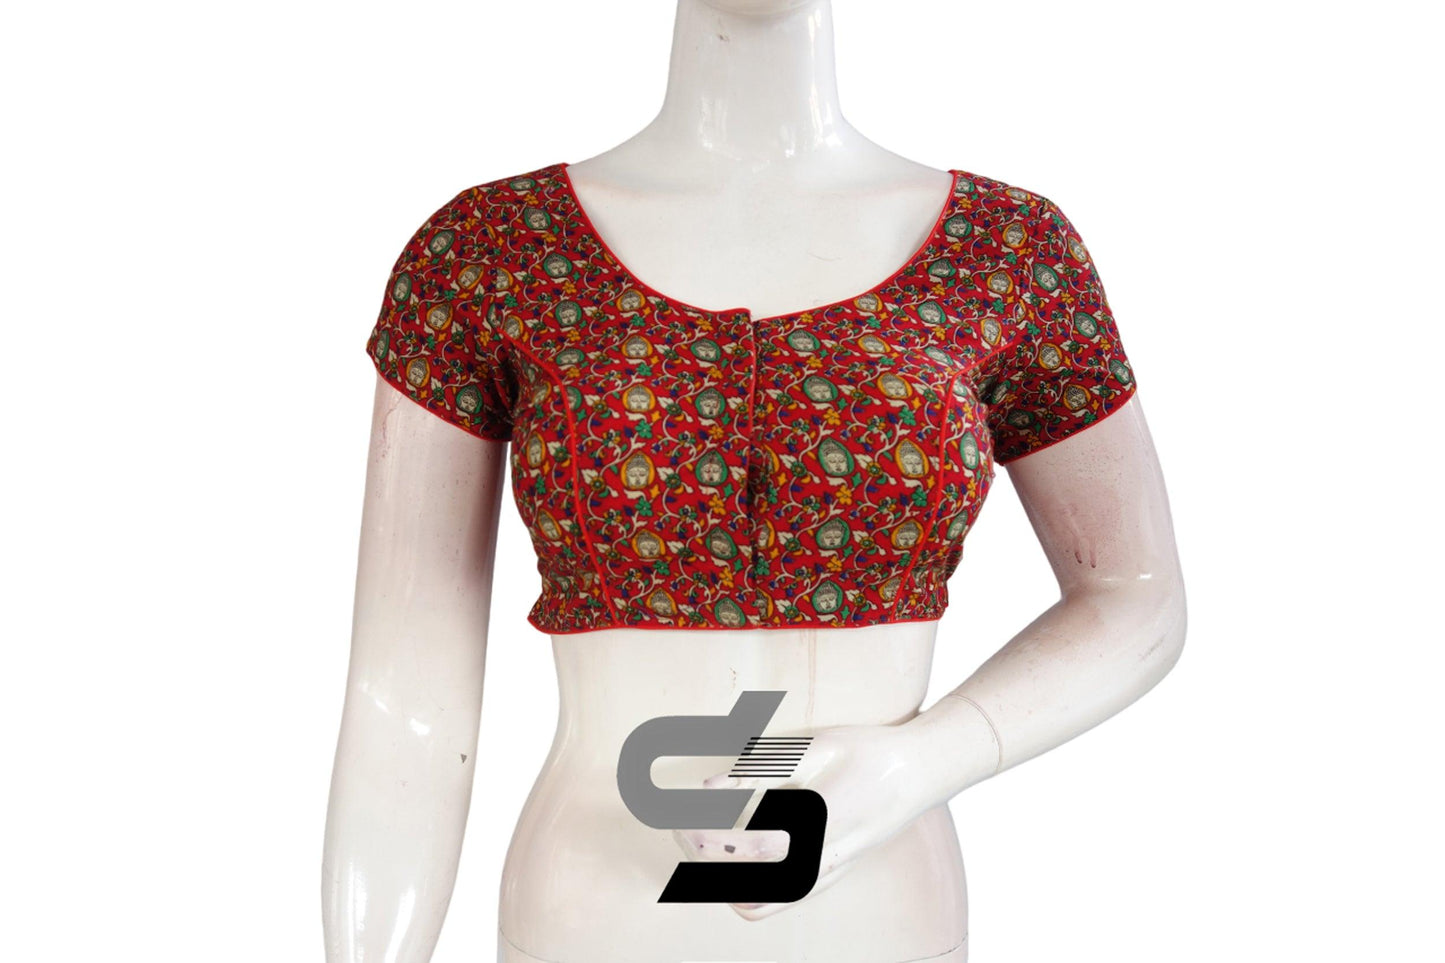 Red Color Patola Print Cotton Readymade Saree Blouse - D3blouses